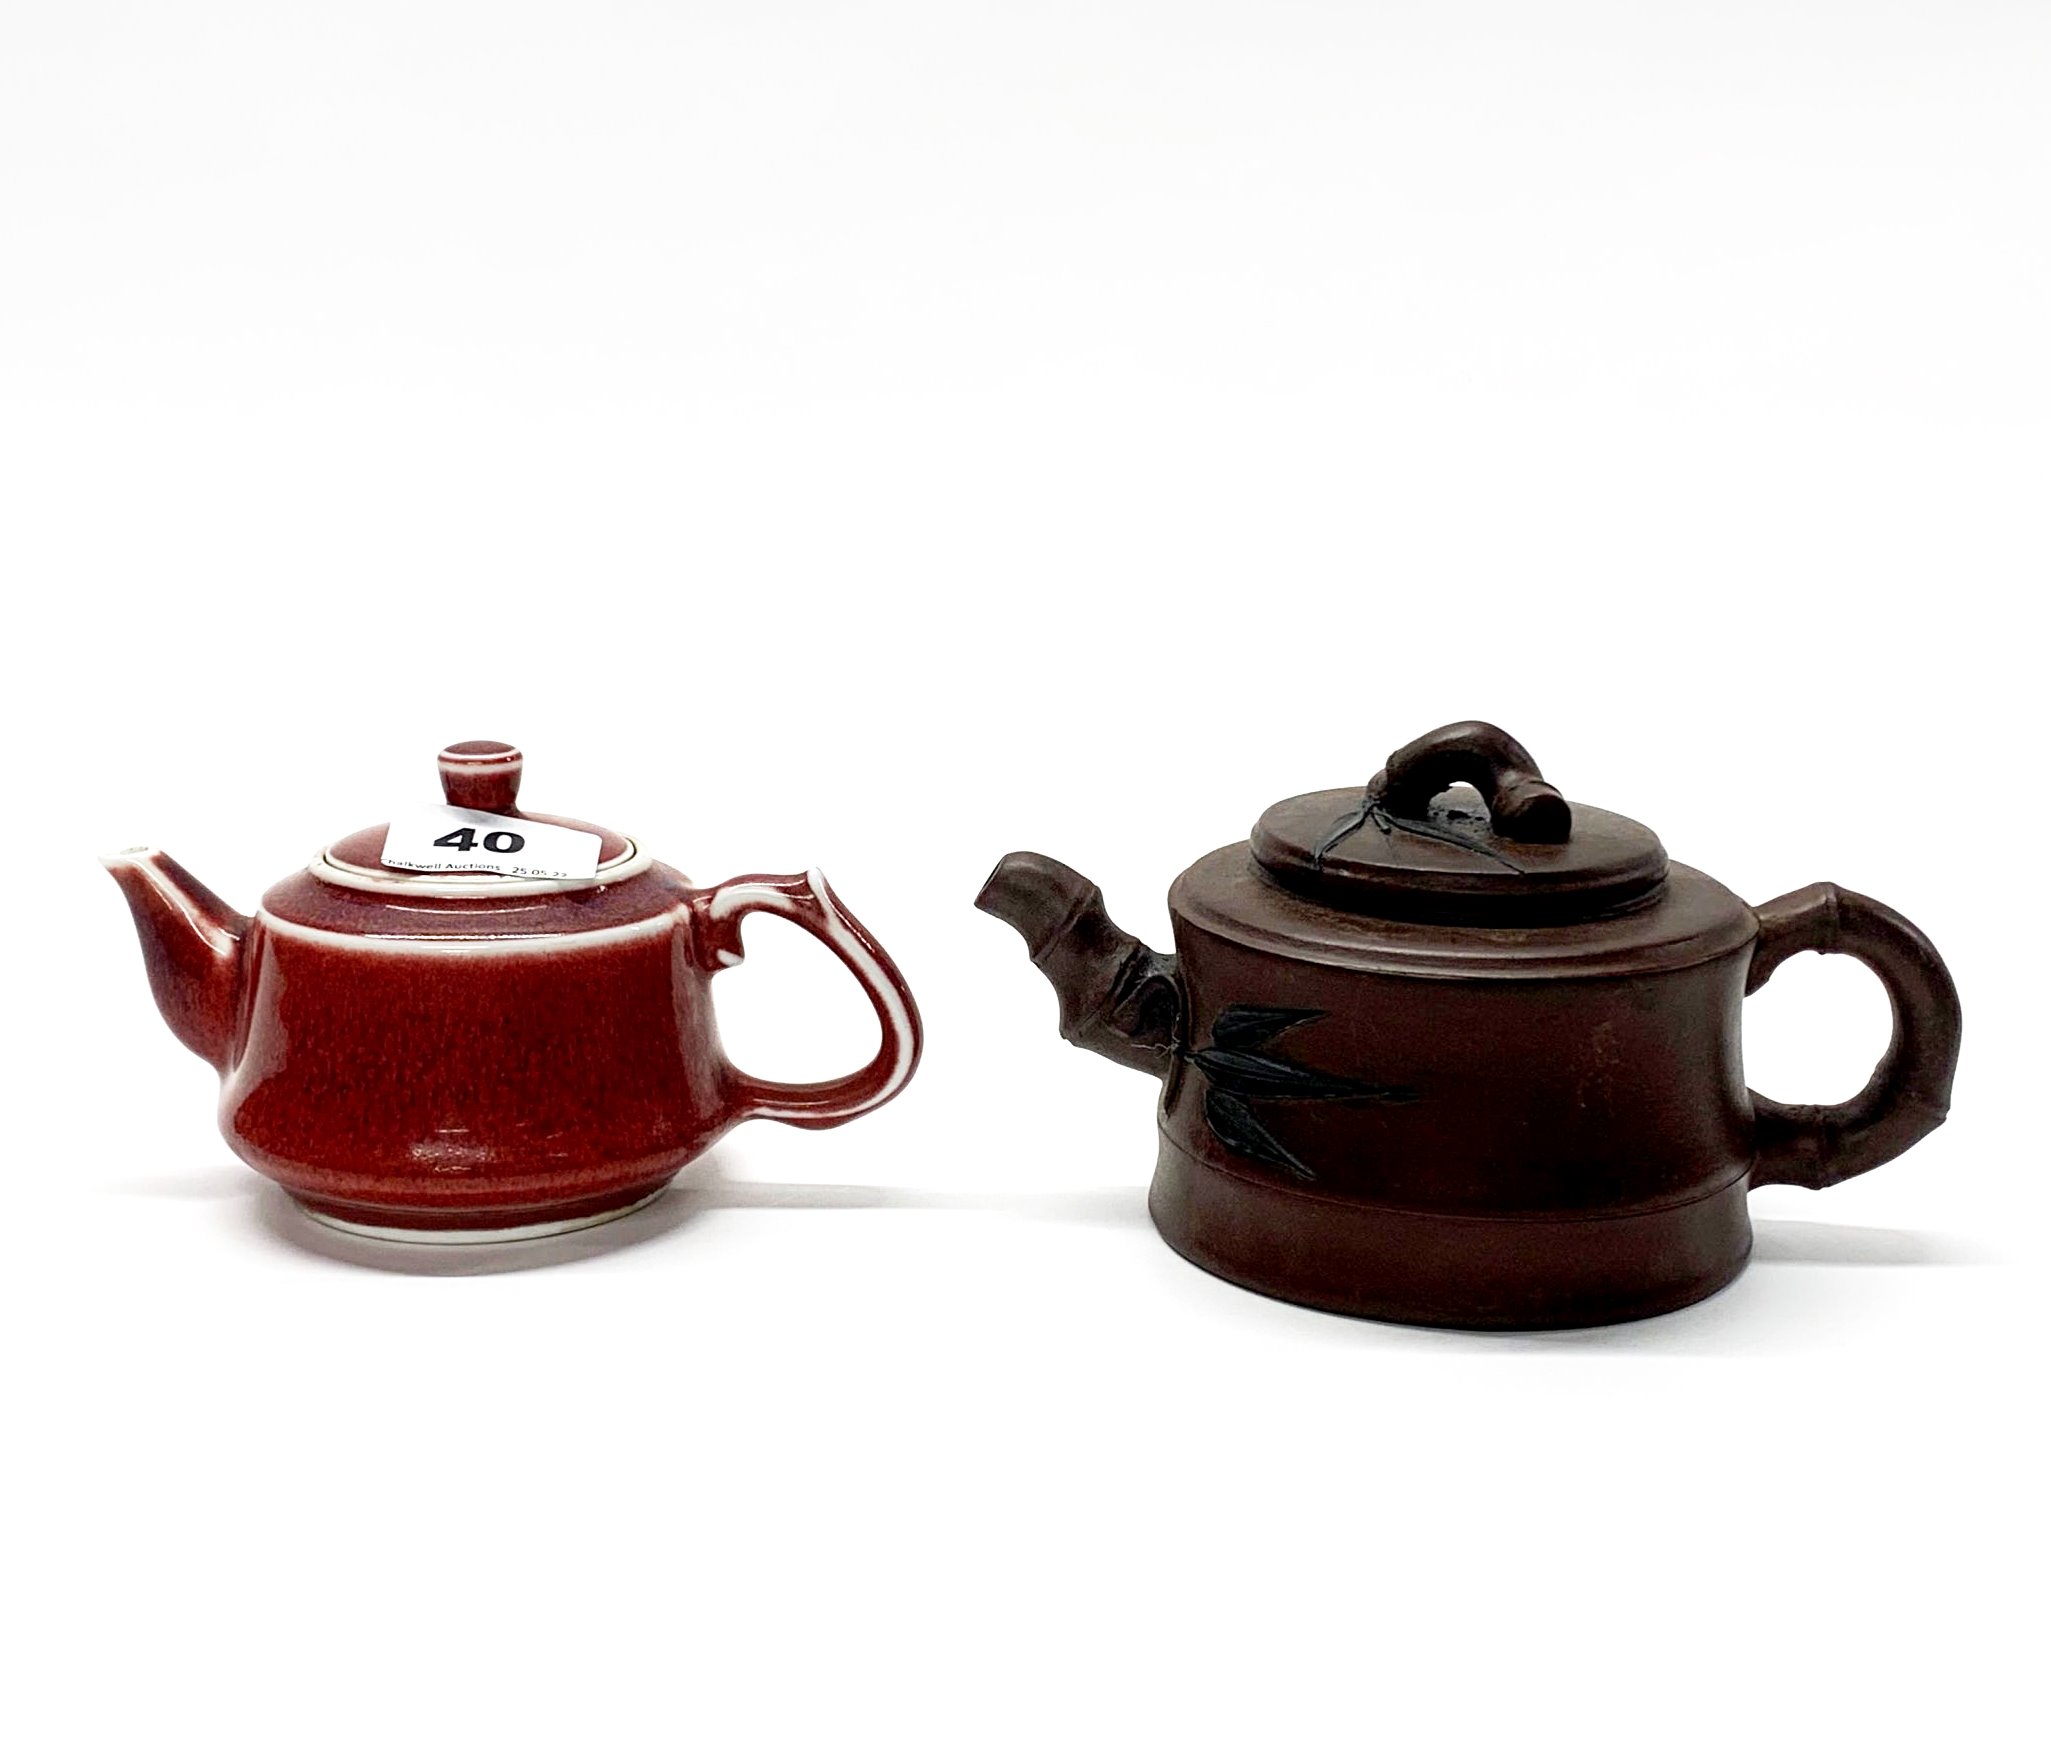 A Chinese Yi Xing terracotta teapot, H. 9cm, spout to handle 14cm, together with a sang de beouf